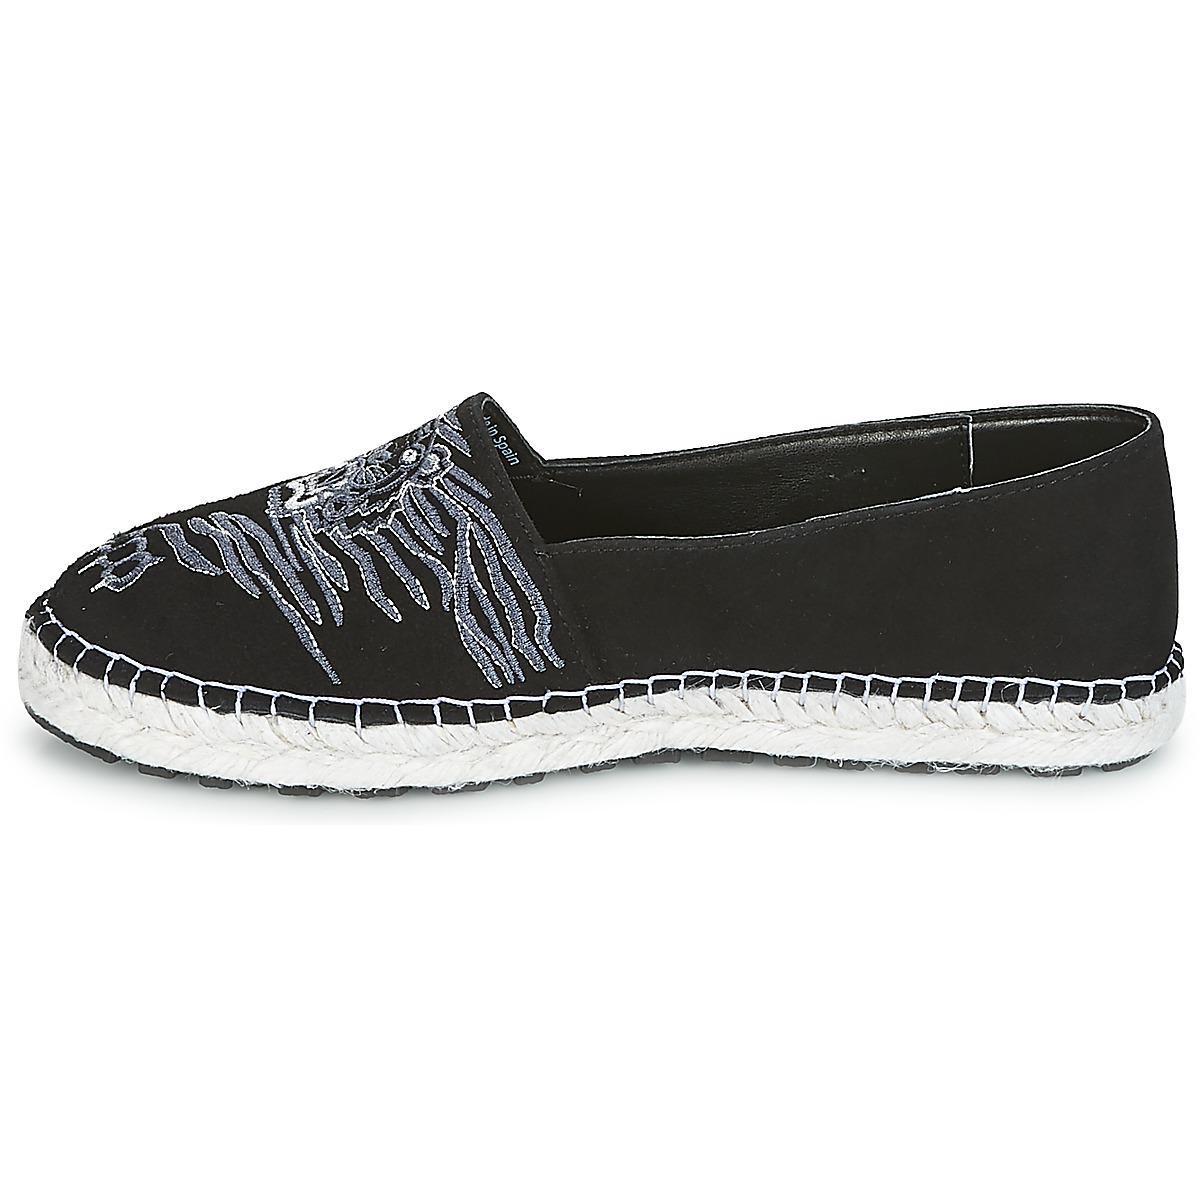 KENZO Kumi Espadrille Espadrilles / Casual Shoes in Black - Save 13% - Lyst